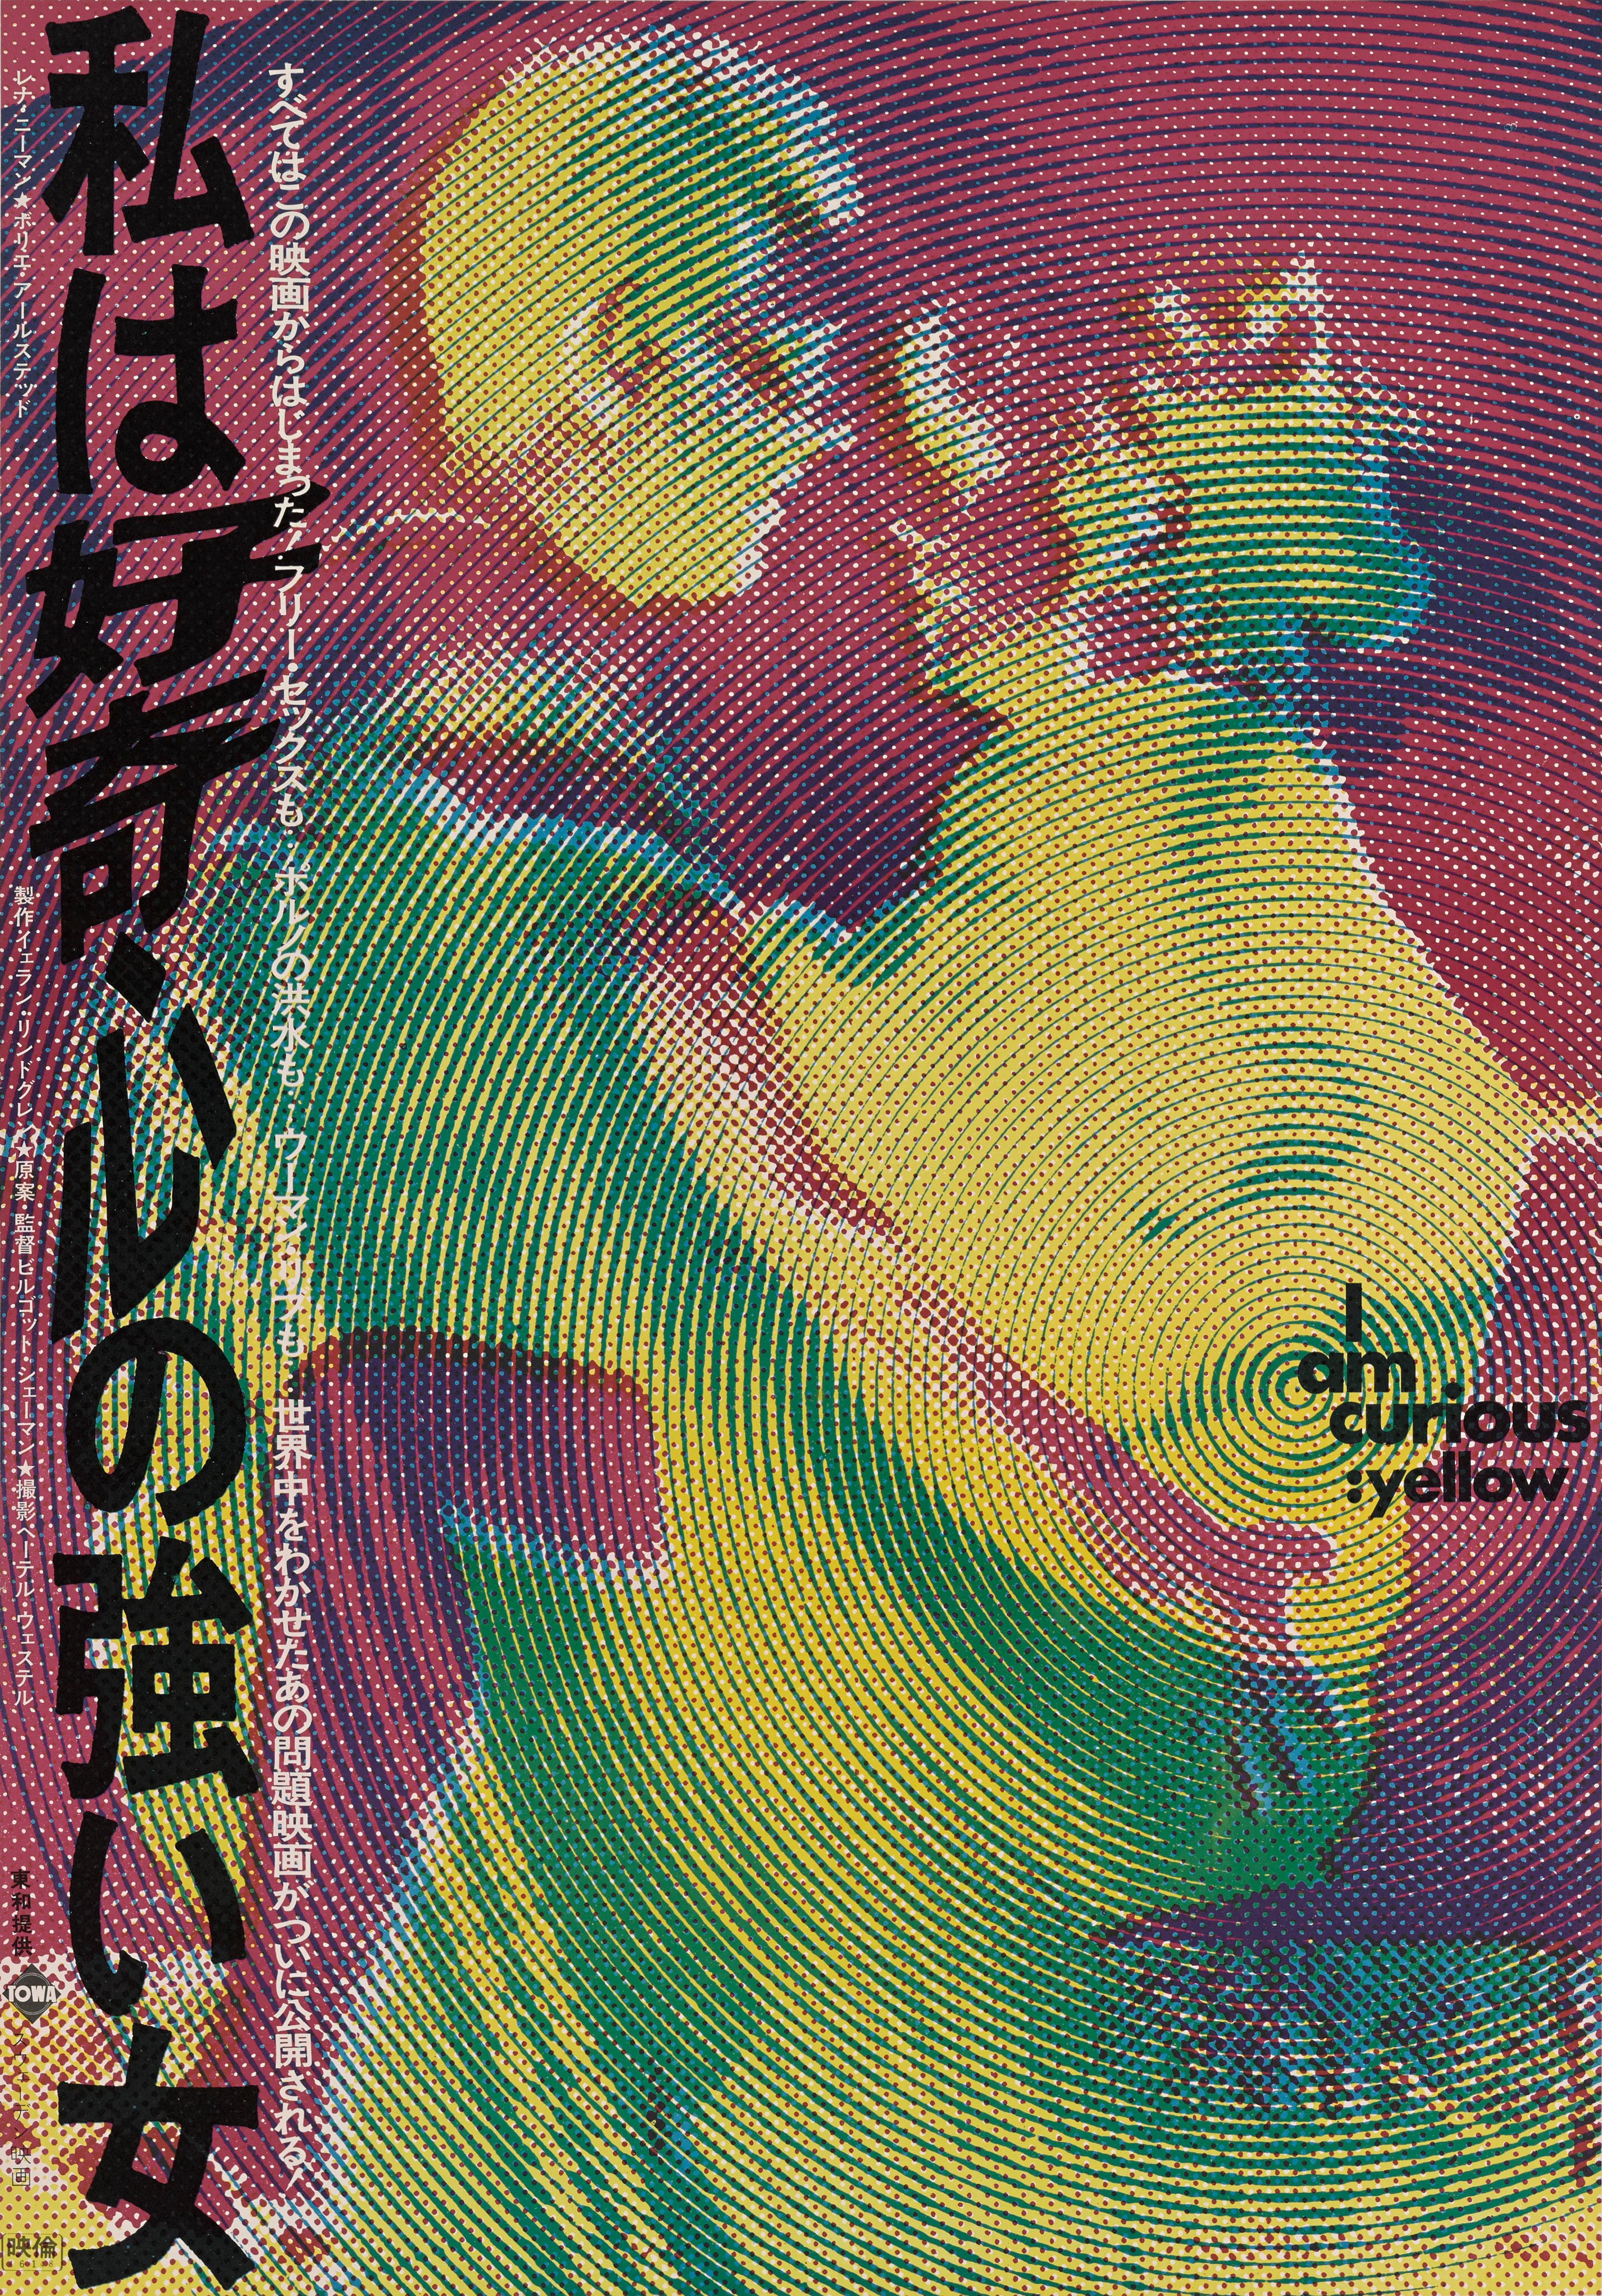 Original Japanese film poster for the 1967 drama, I Am Curious (Yellow)
This Swedish film was directed by Vilgot Sjoman and starred Lena Nyman, Vilgot Sjöman and Börje Ahlstedt.
This Japanese poster was created for the films first release in Japan